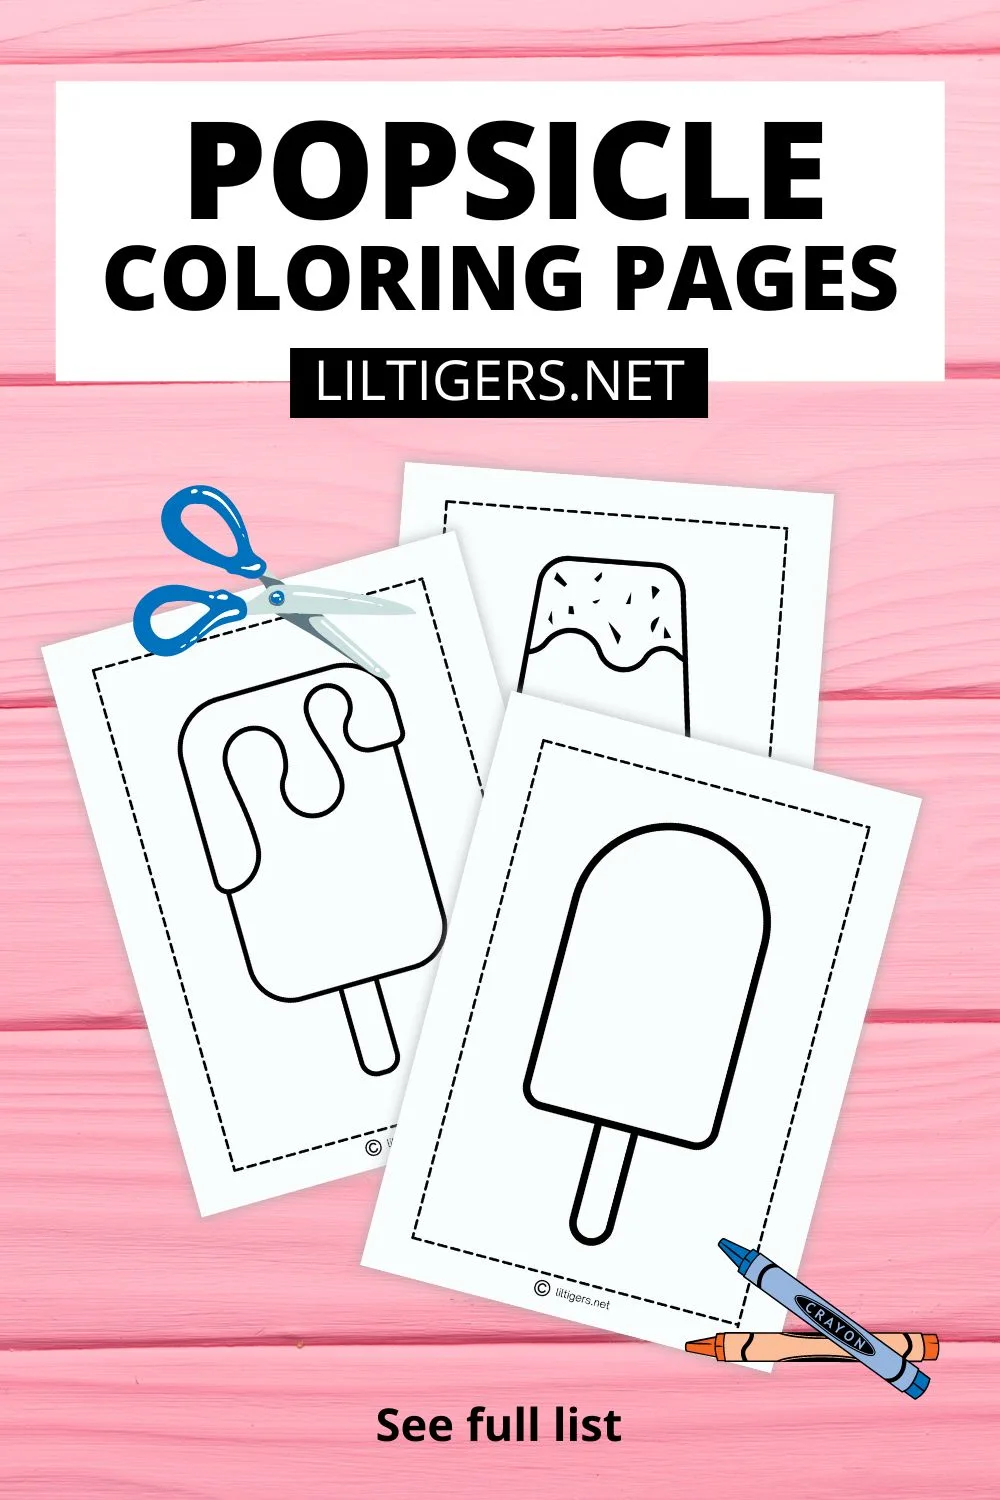 POPSICLE COLORING PAGES